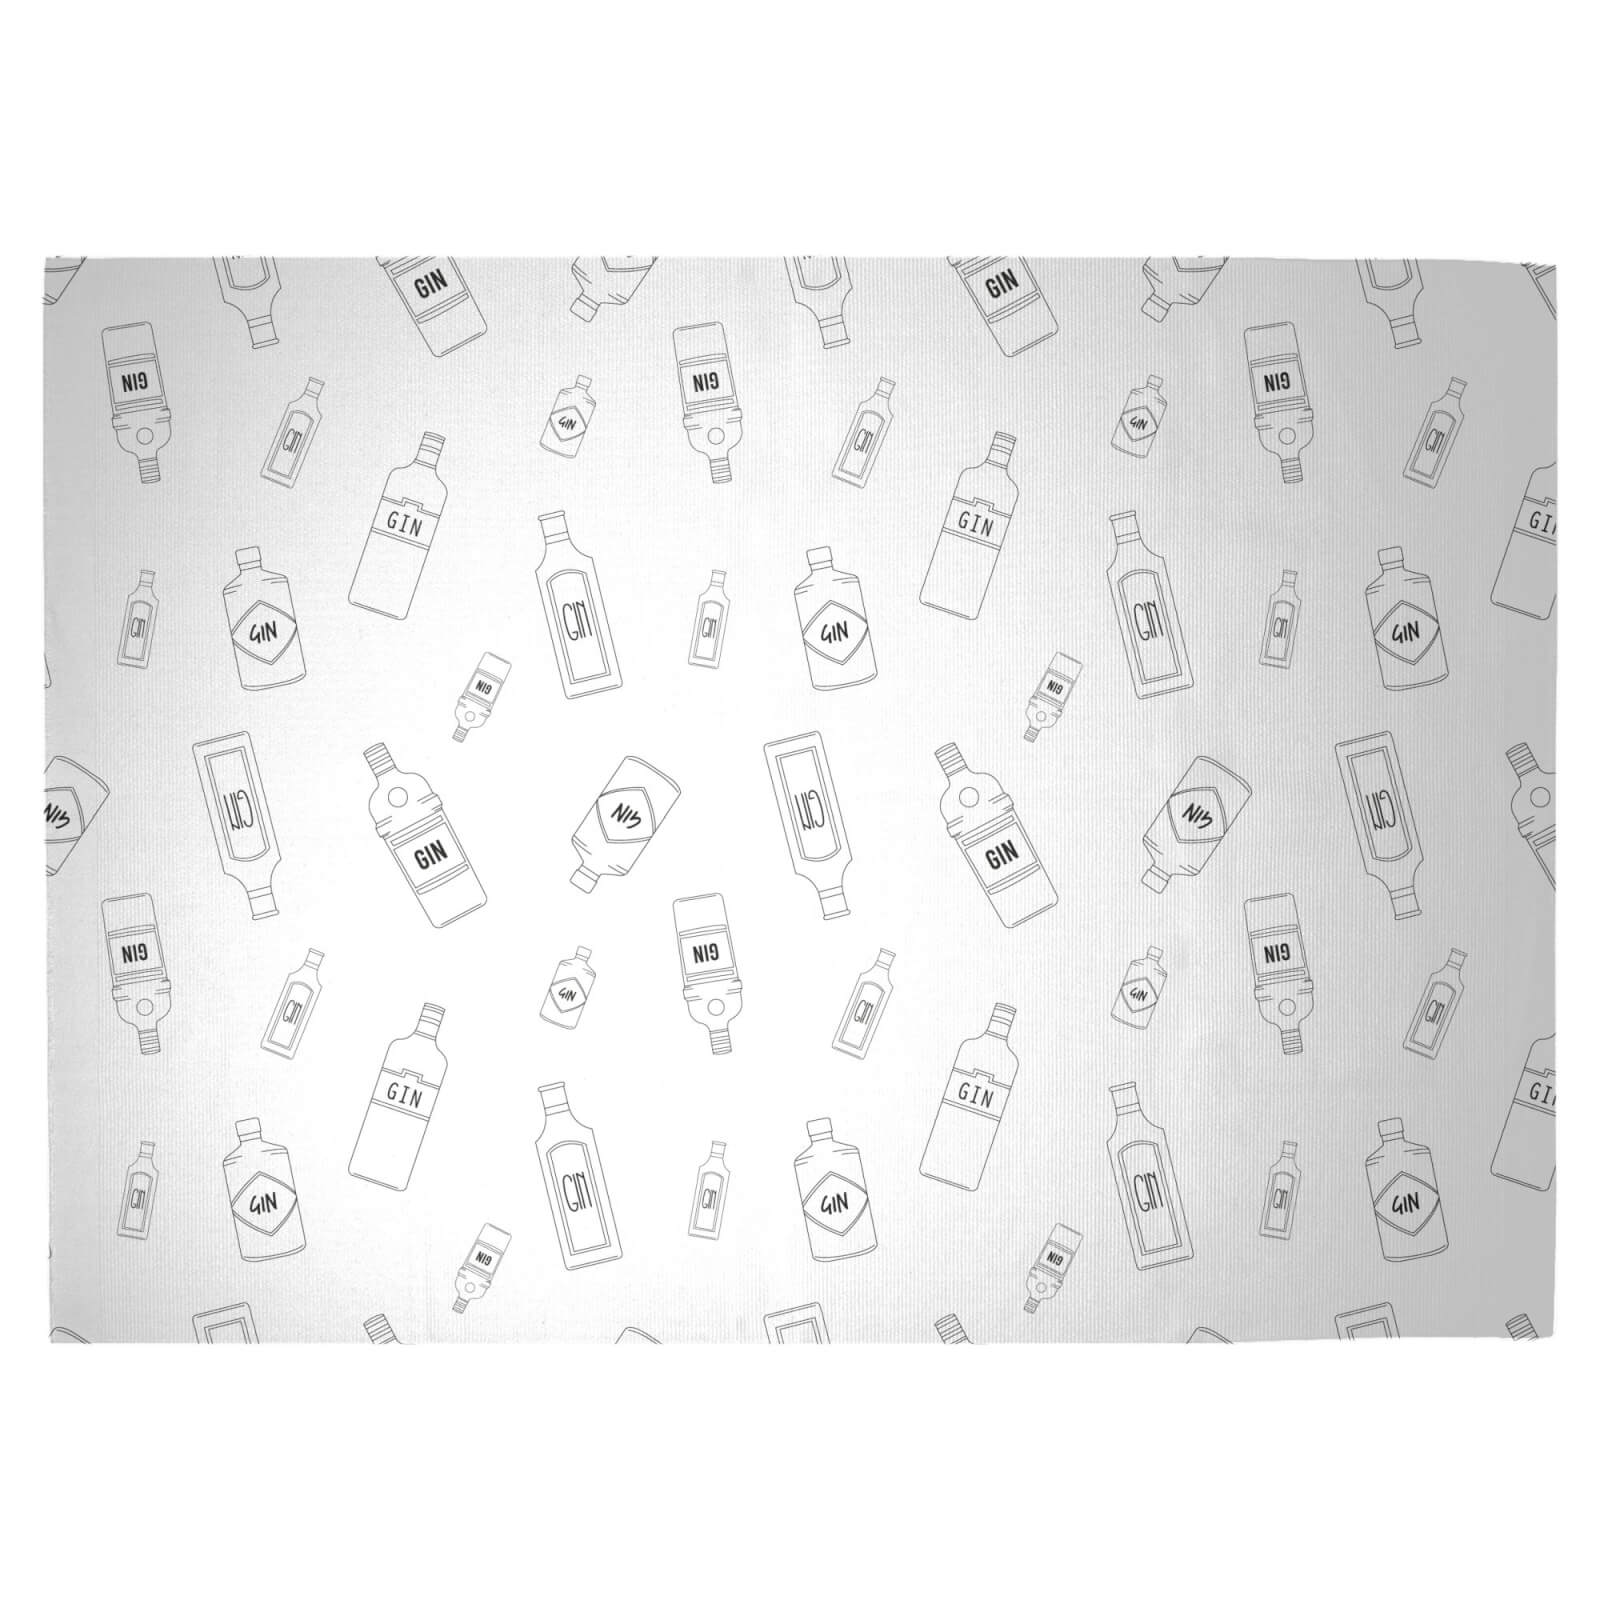 Gin Bottles Black And White Woven Rug - Large